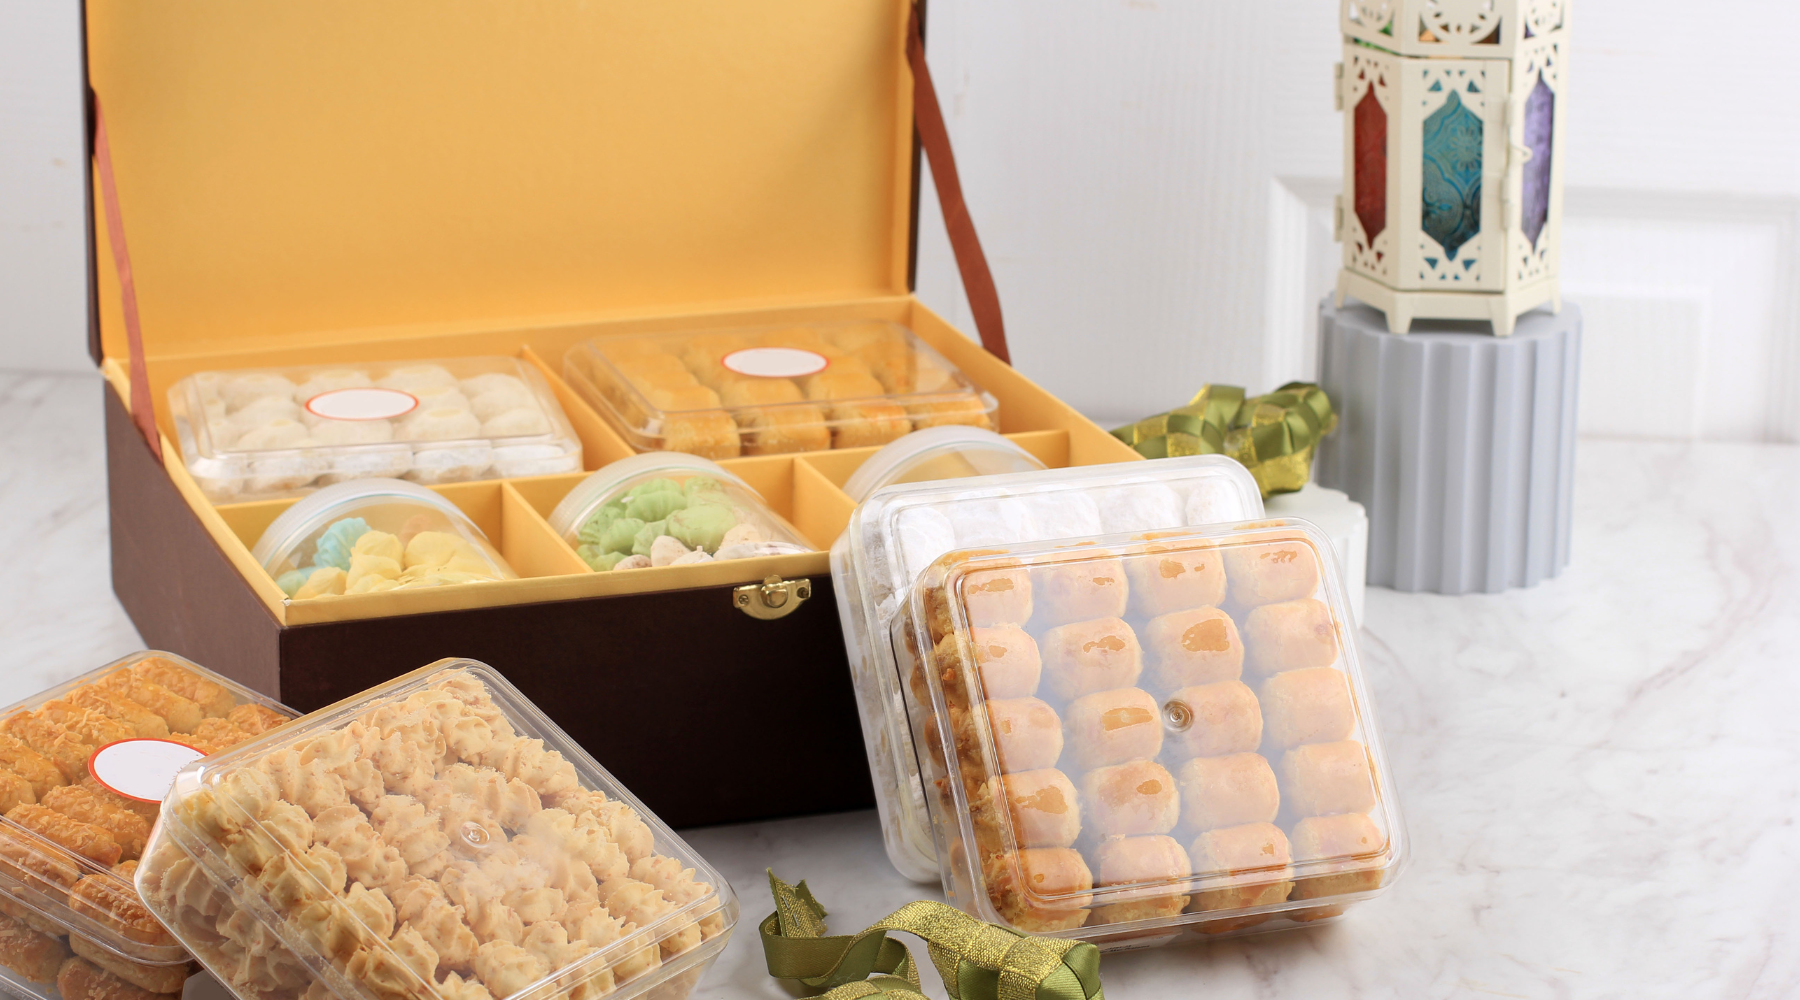 Assorted gourmet treats neatly arranged in a golden gift box on a marble countertop.